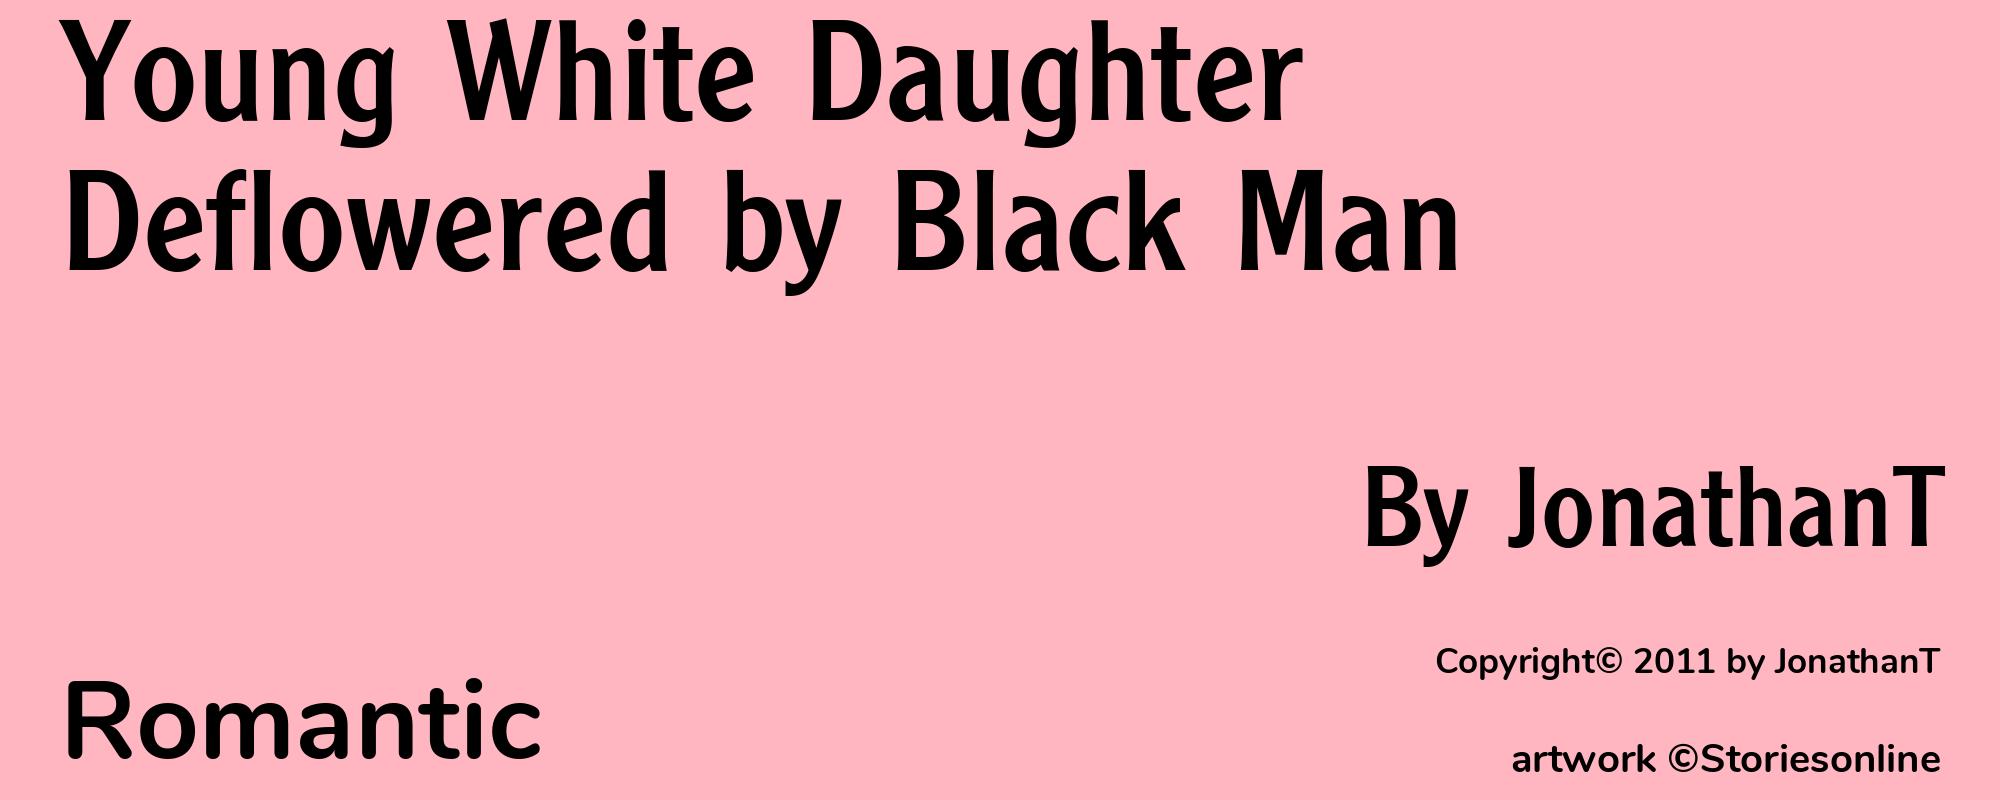 Young White Daughter Deflowered by Black Man - Cover